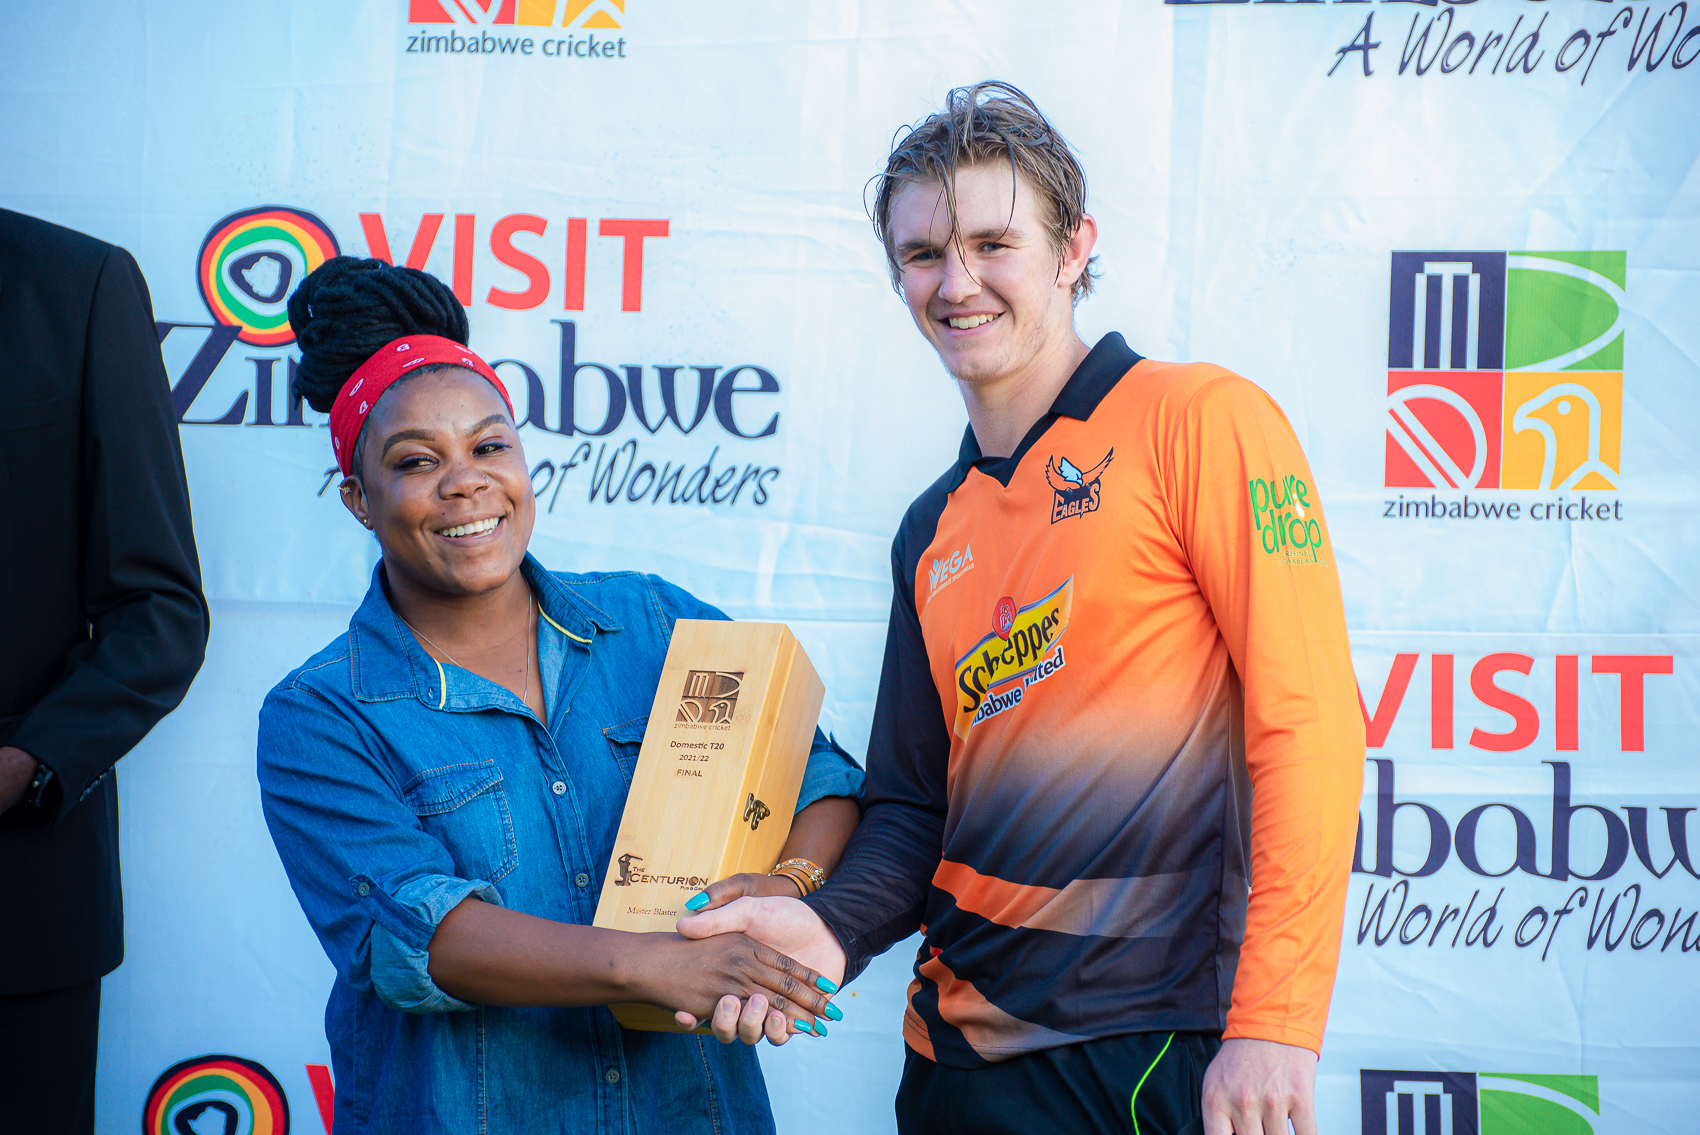 Eagles beat Mountaineers in final to lift T20 silverware